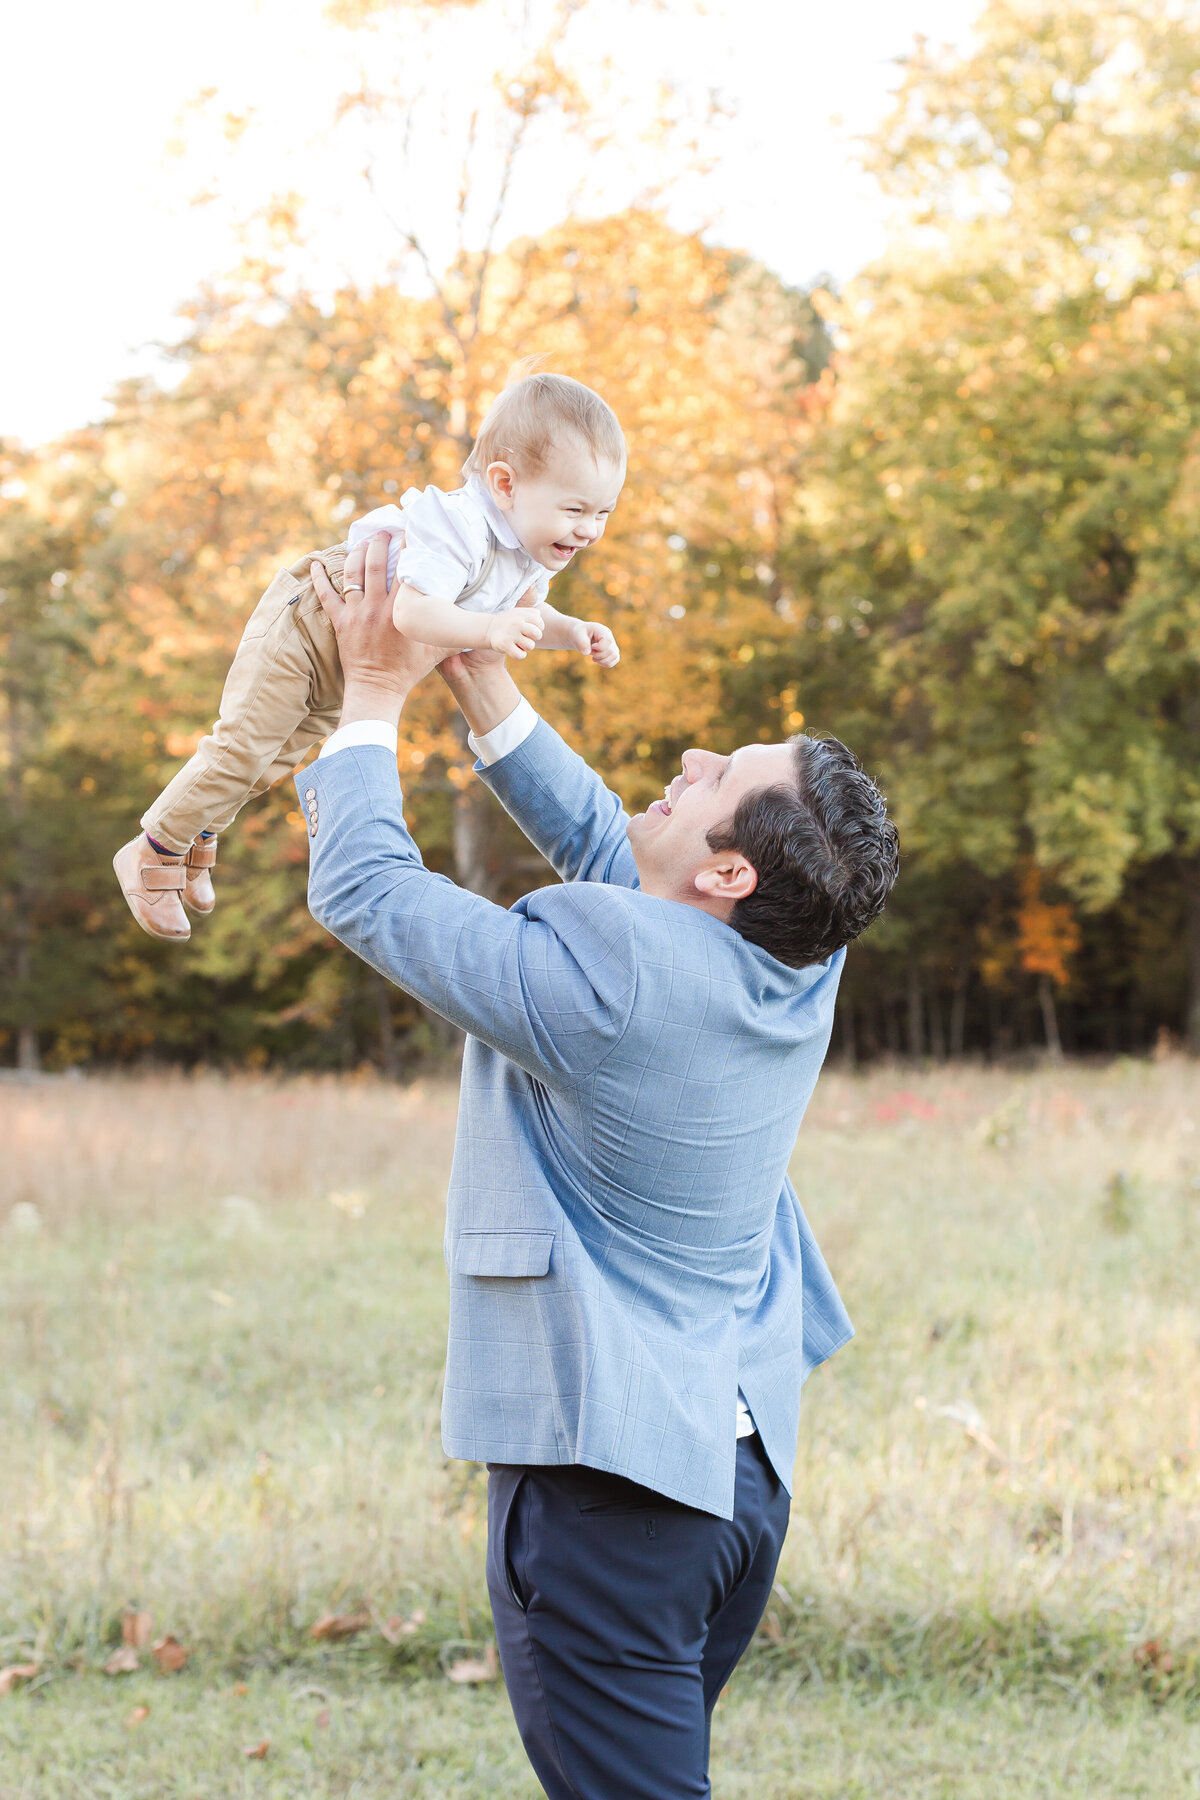 A sweet dad playing with his toddler boy by throwing him in the air outside in the Fall by DC Family Photographer